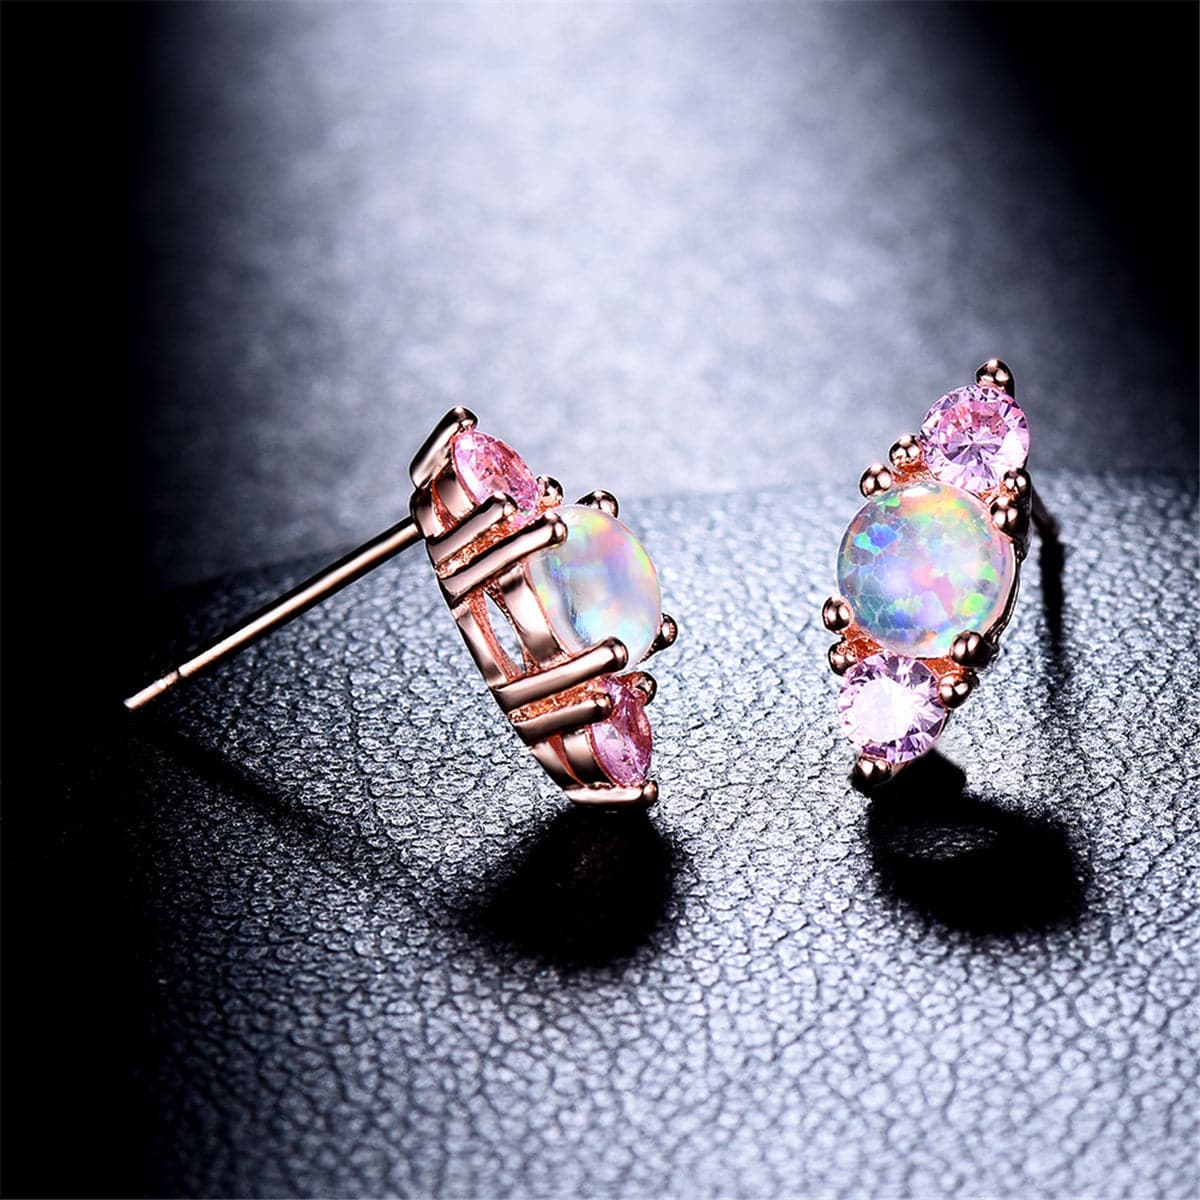 Opal & Pink Cubic Zirconia Stacked Round-Cut Stud Earrings